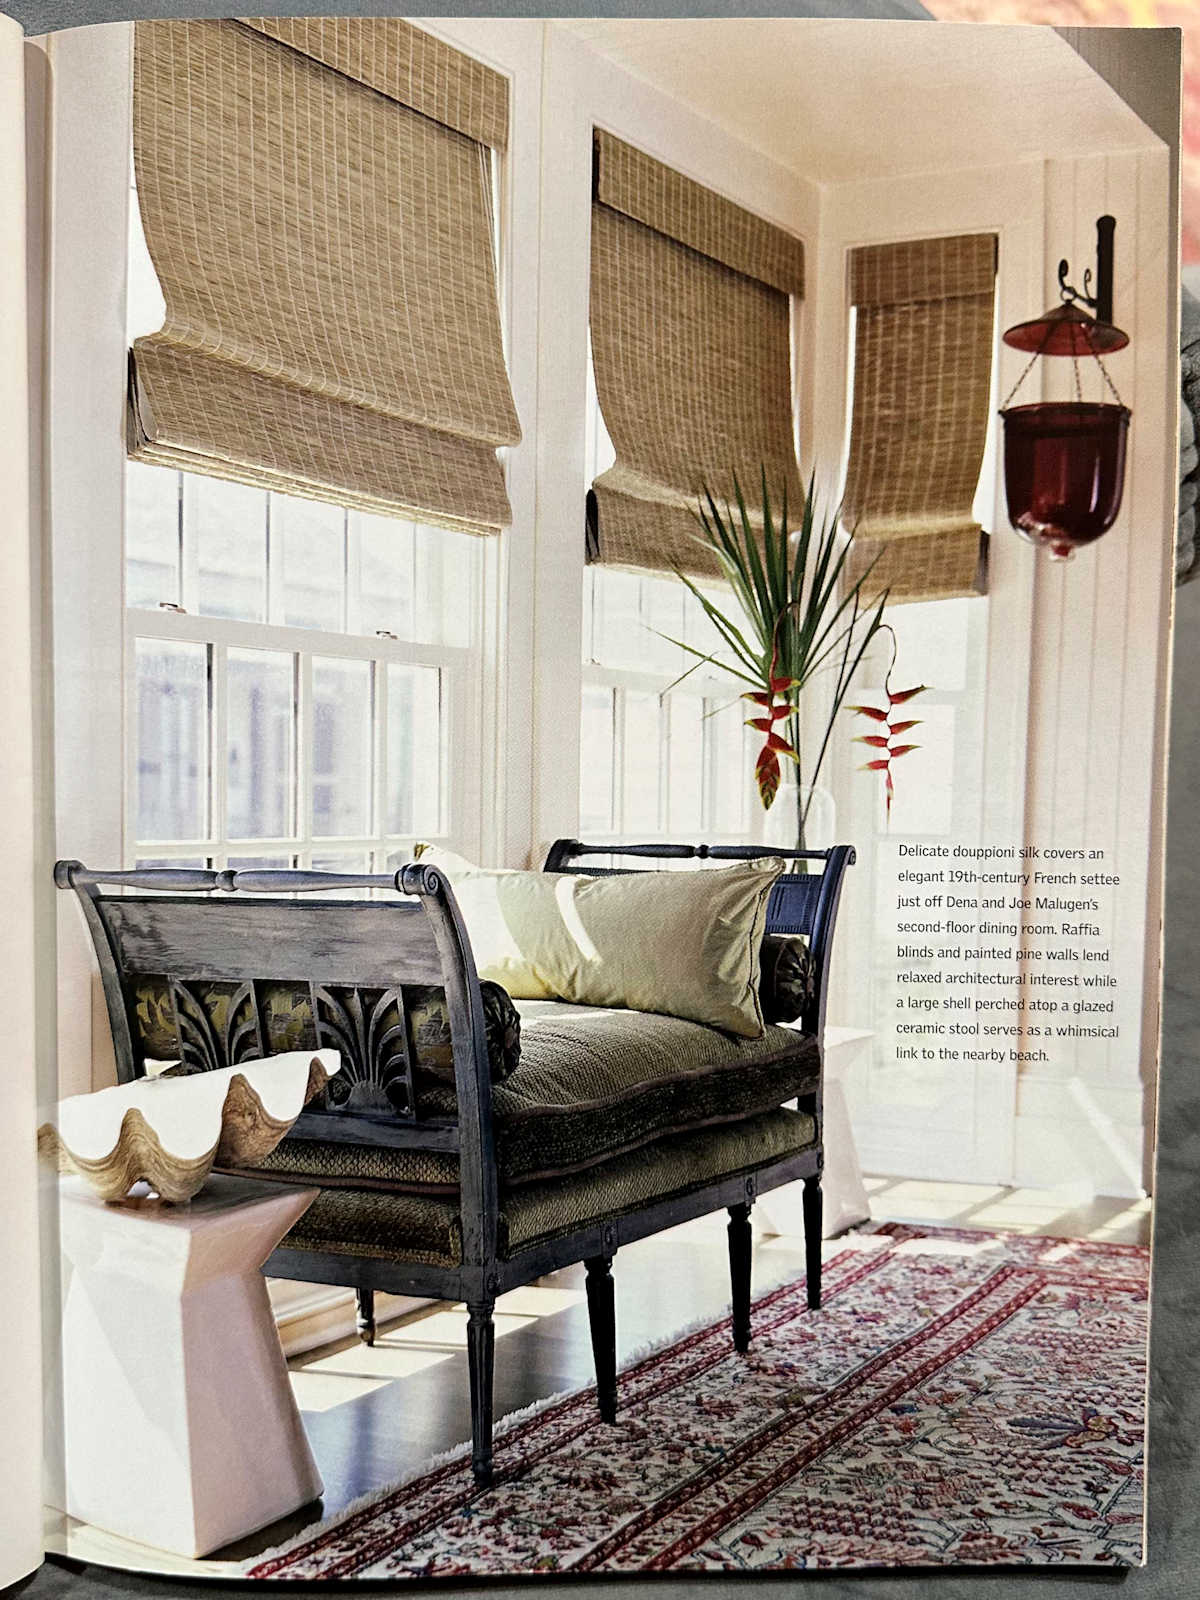 A sitting area with area rug, upholstered bench, and woven shades from 2006, still looks pretty in 2023